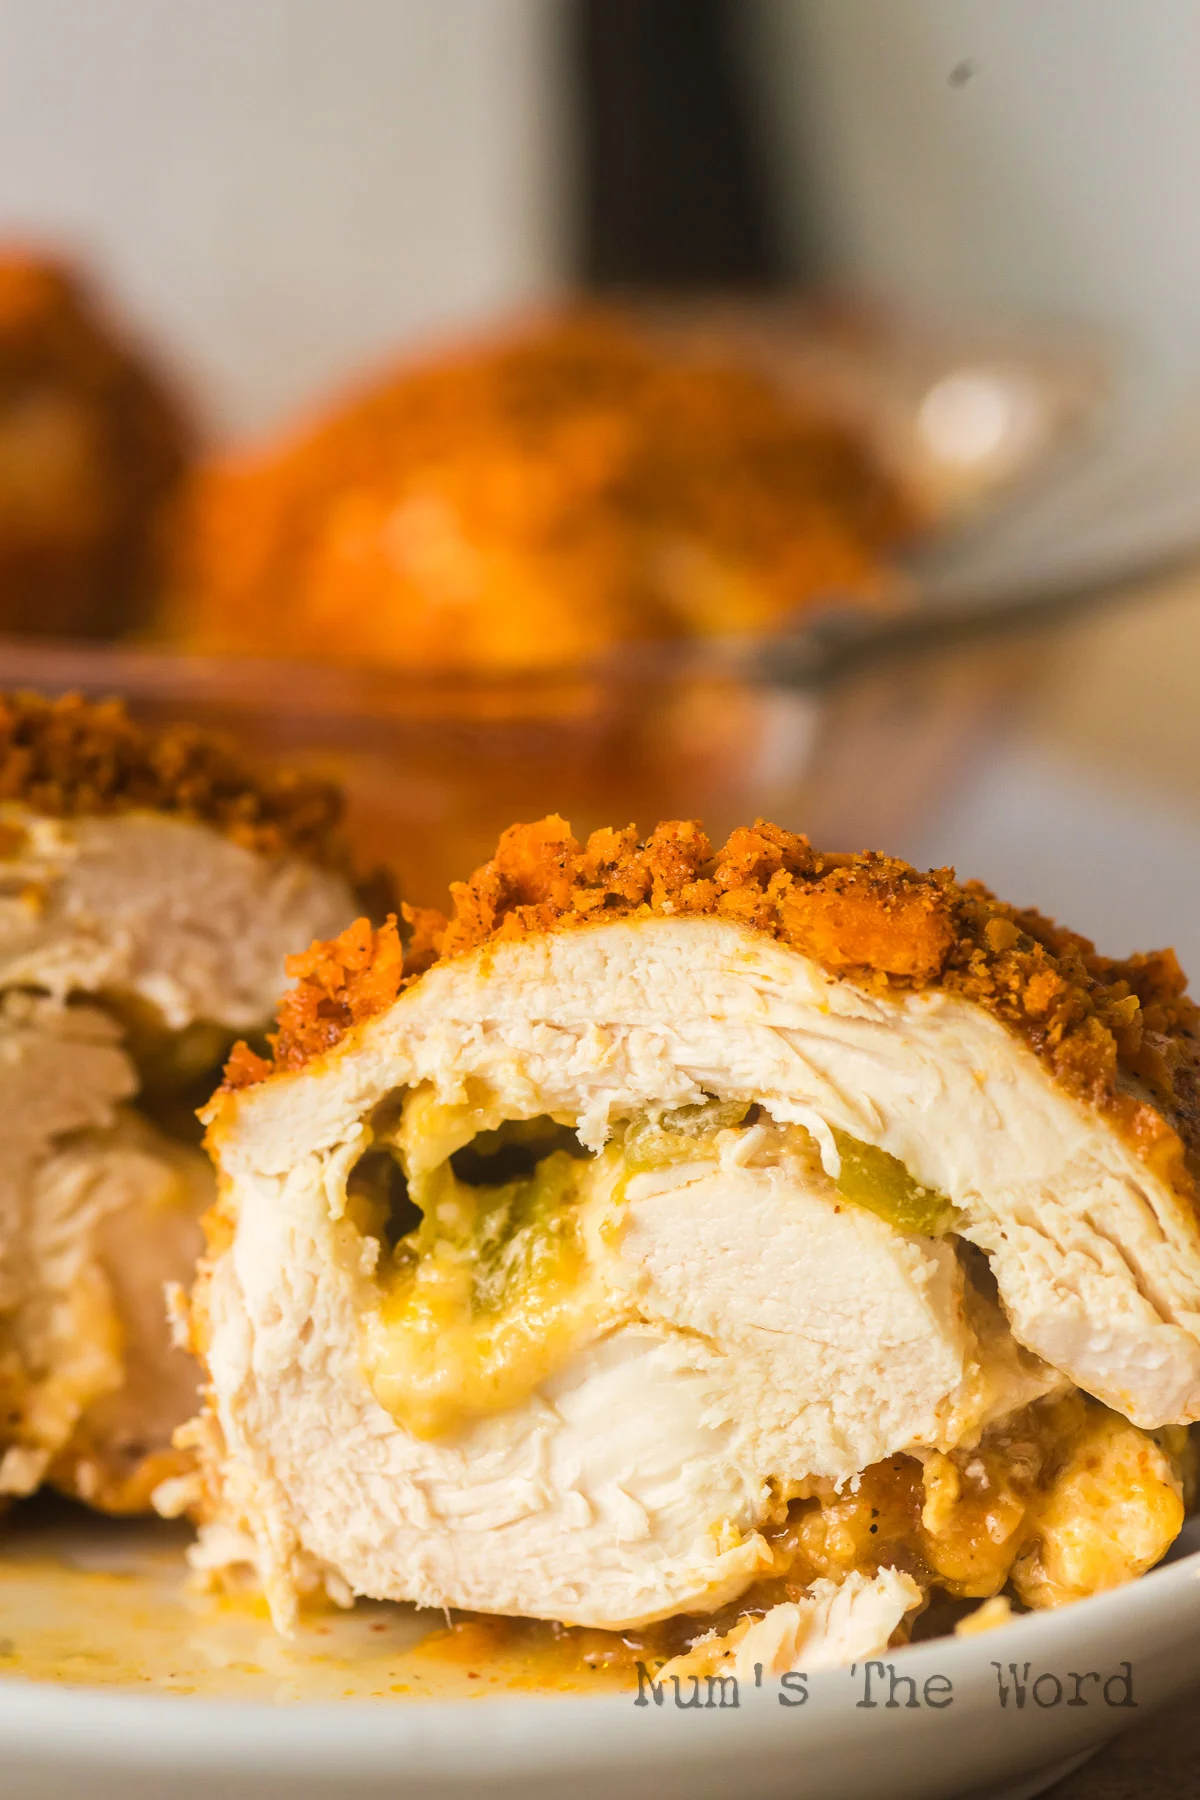 zoomed in image of sliced chicken breast showing filling